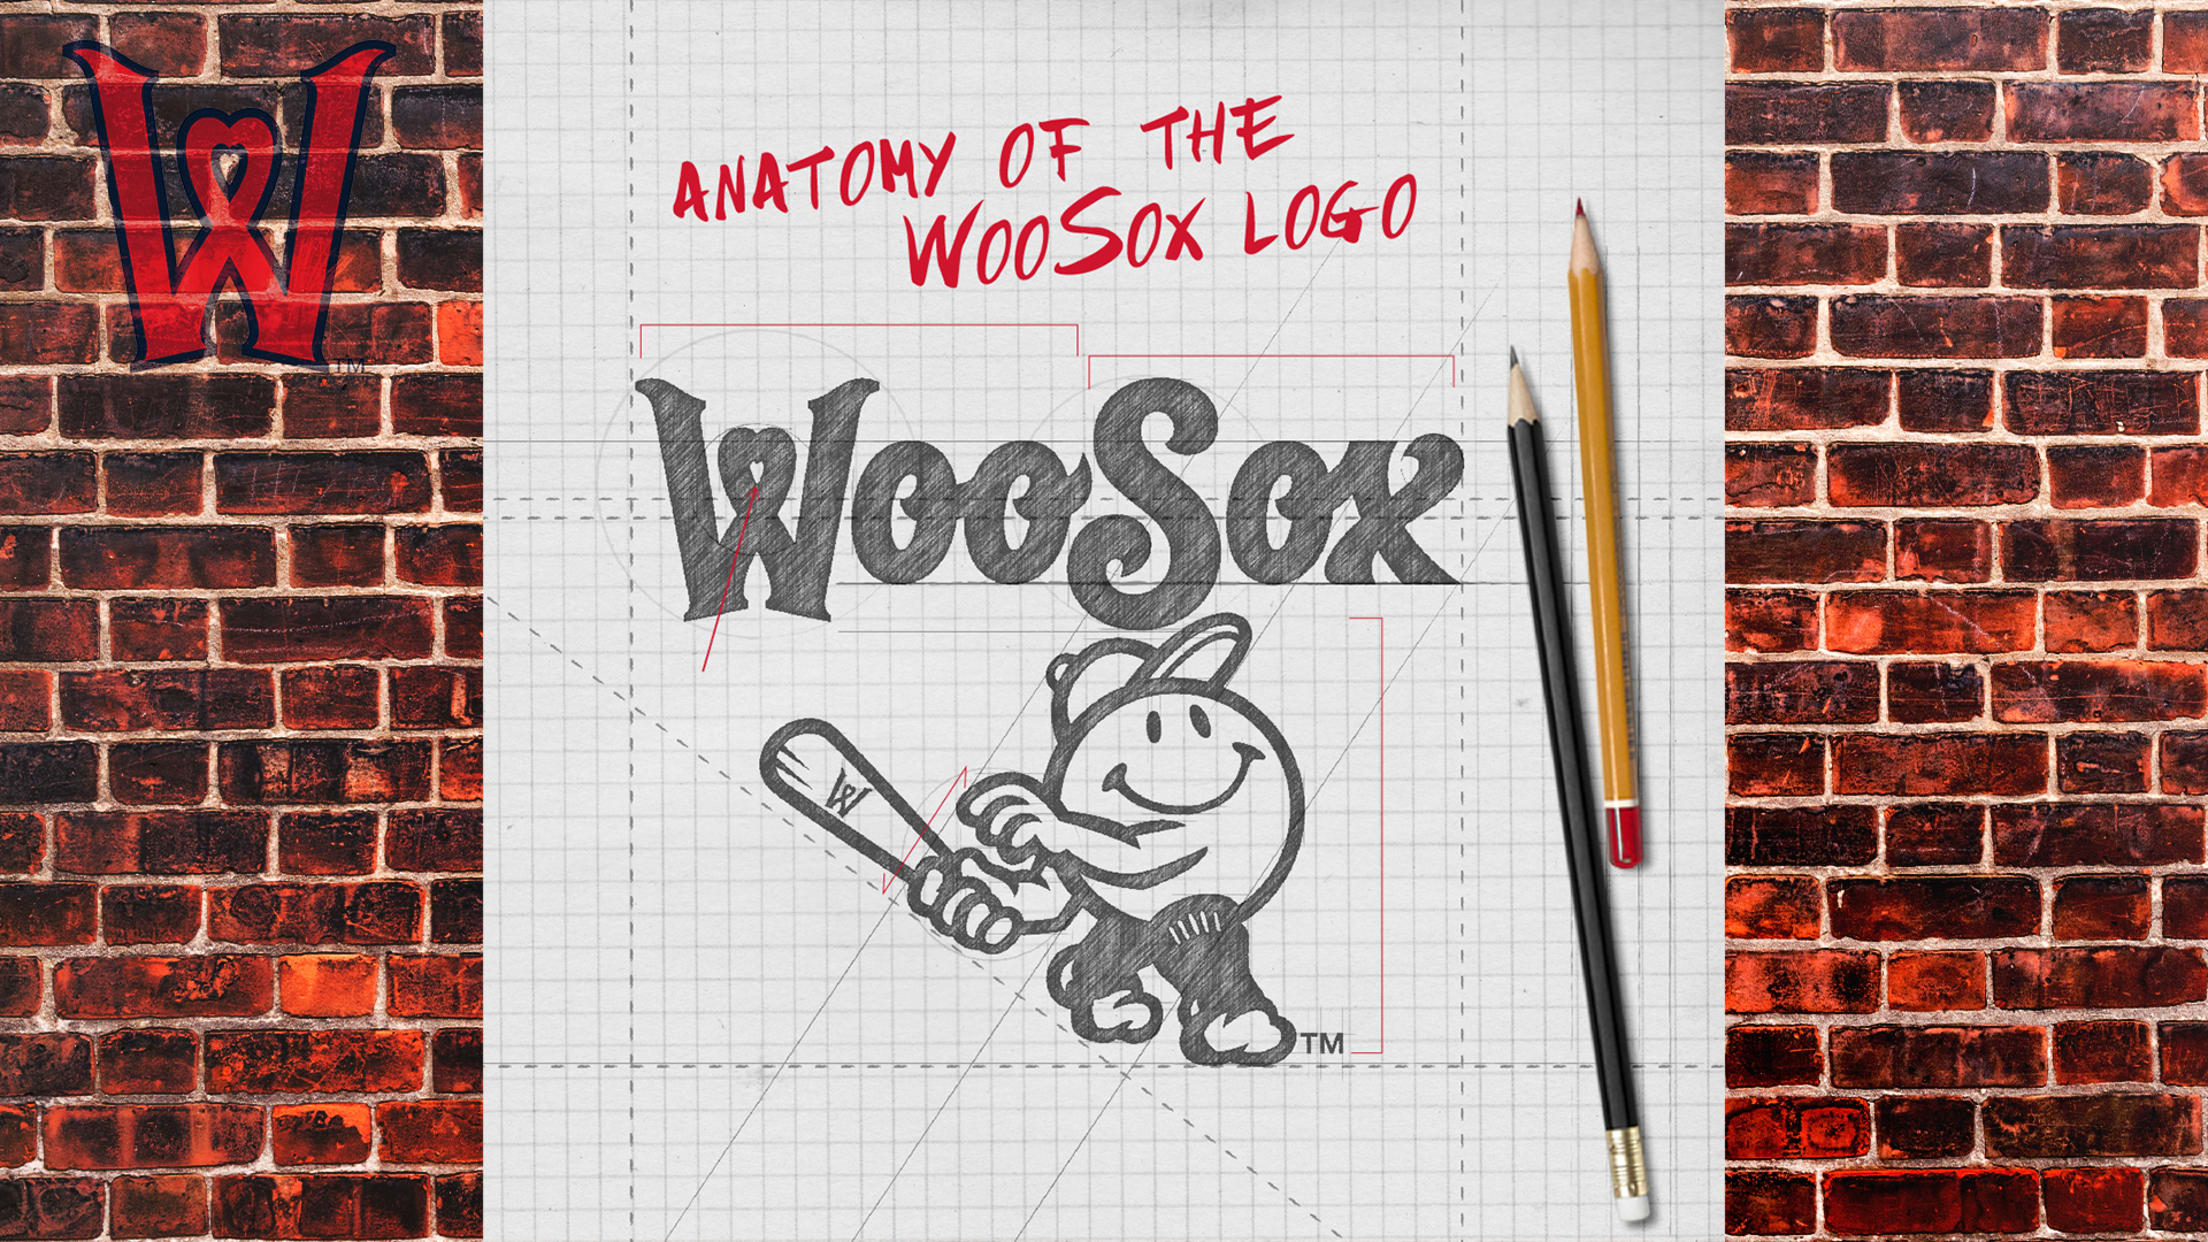 Why WooSox? Red Sox